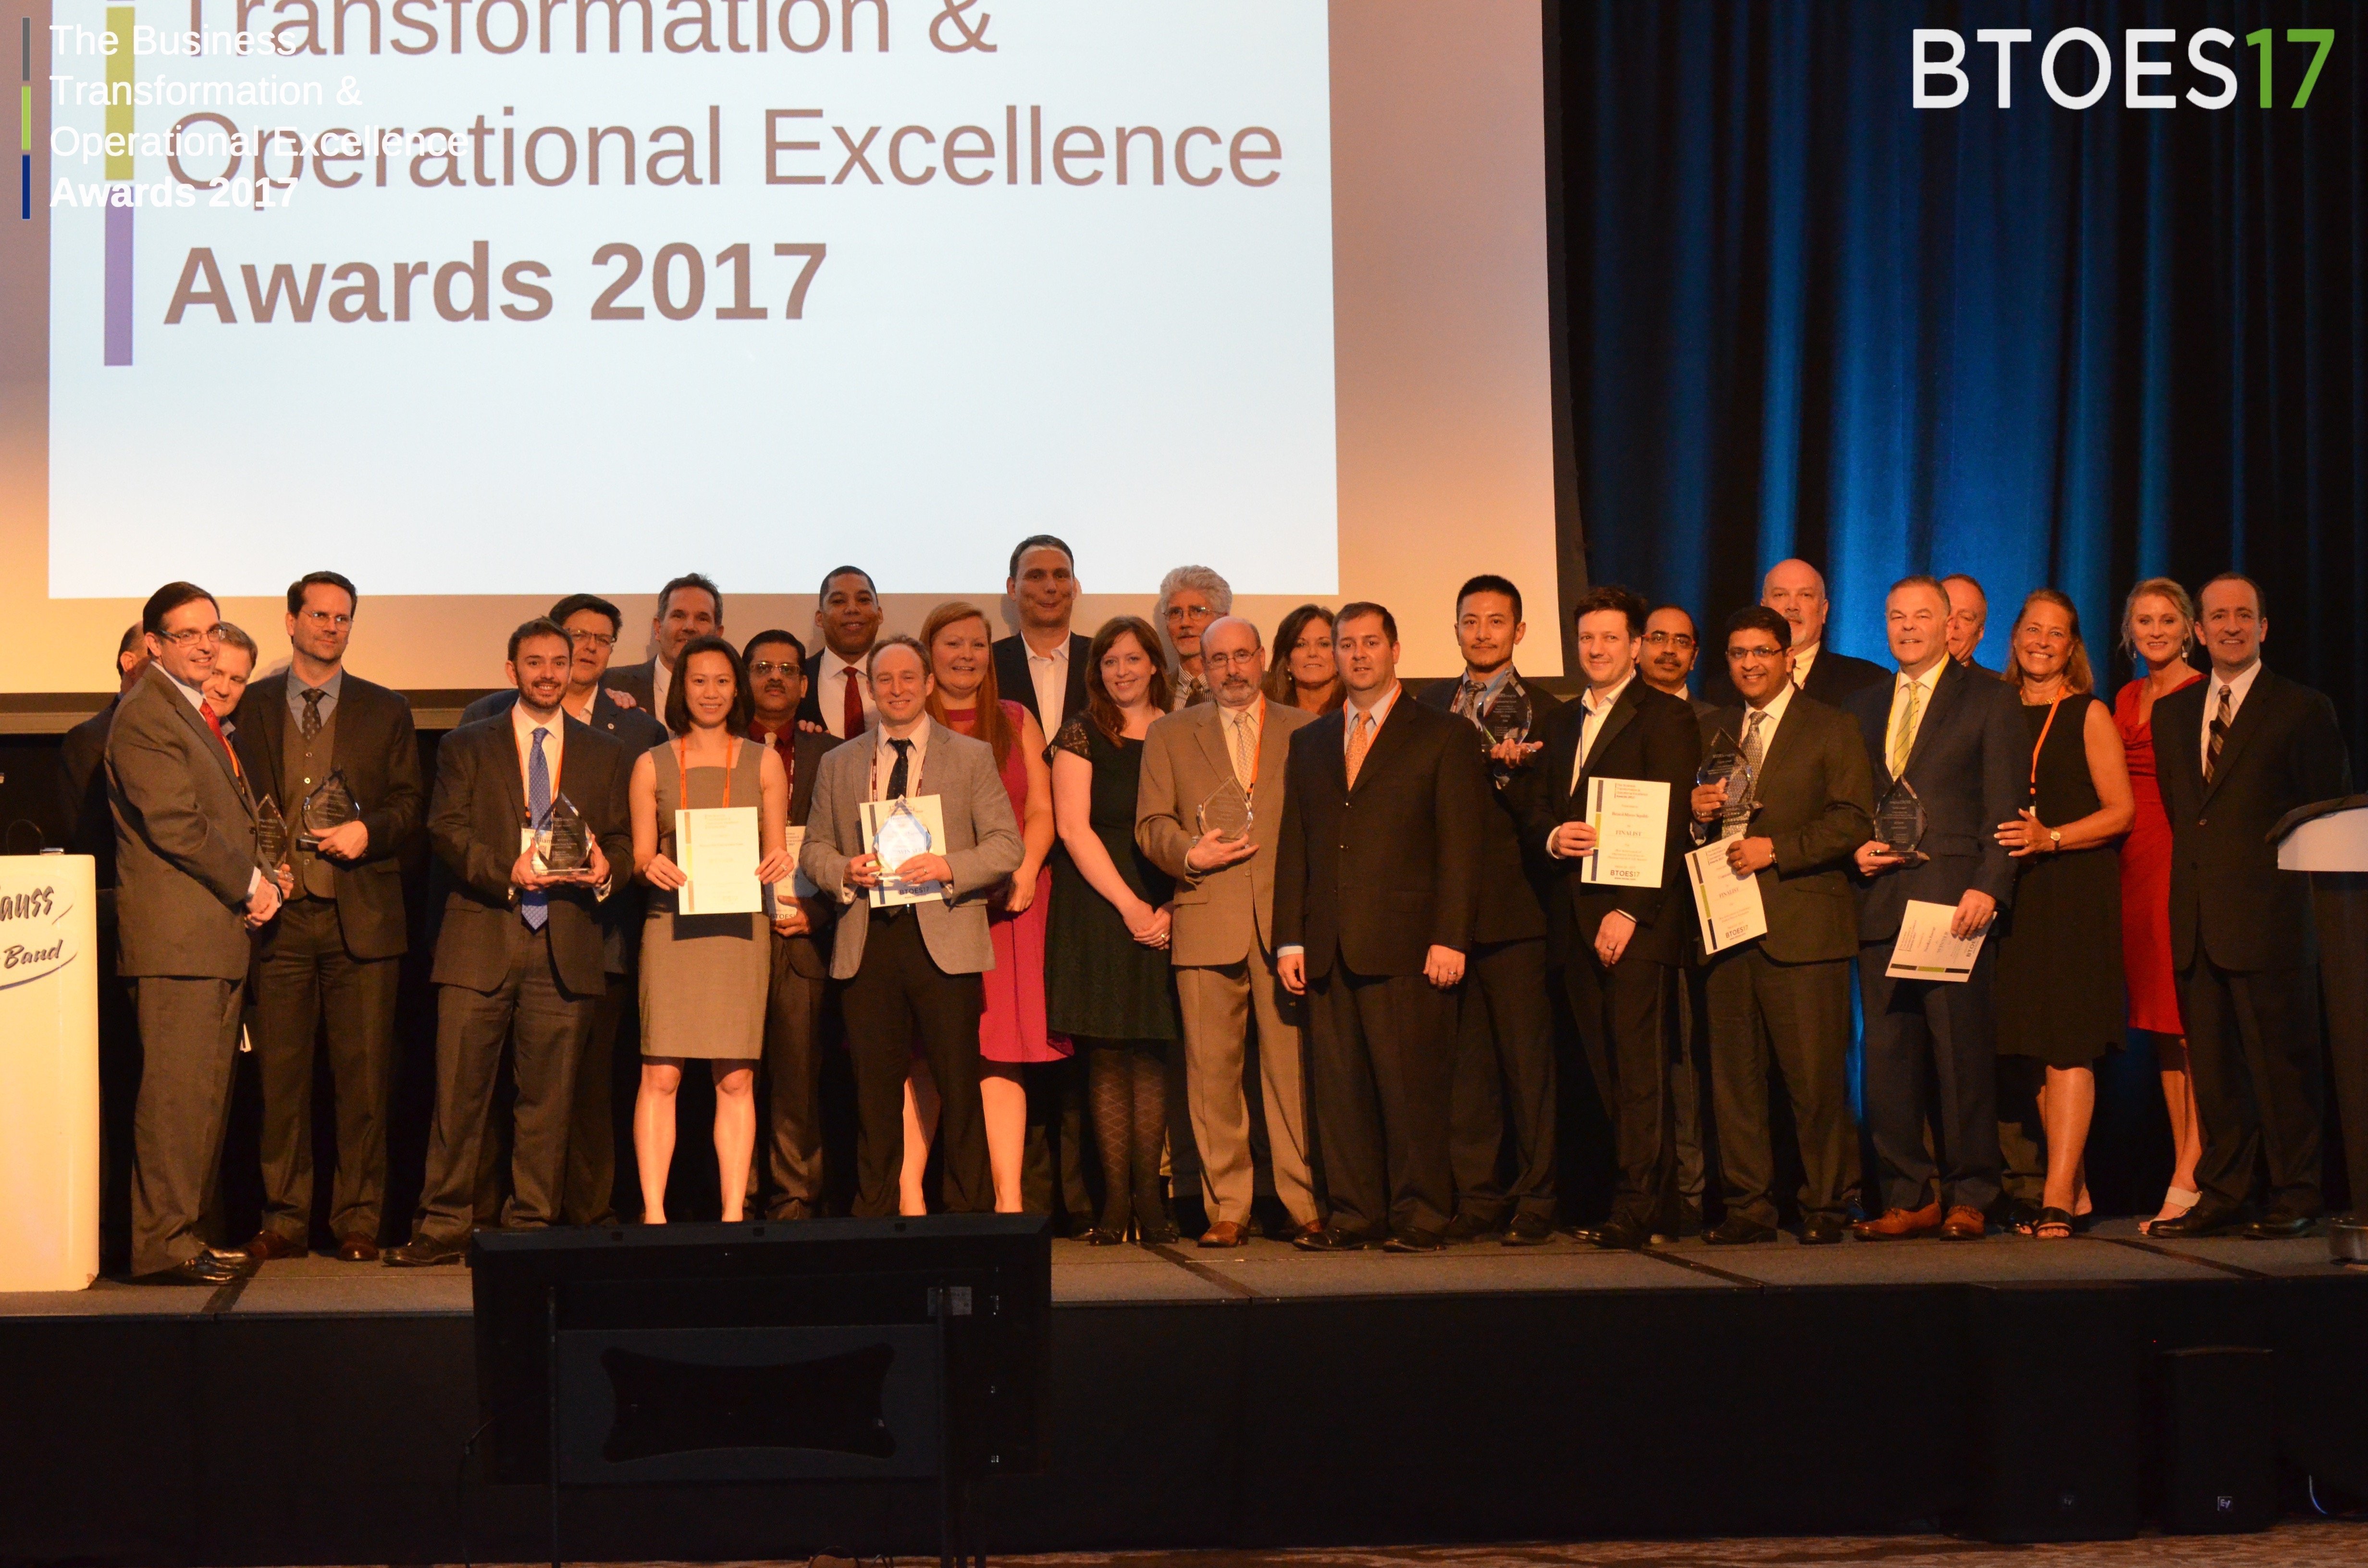 The Business Transformation & Operational Excellence Awards Winners